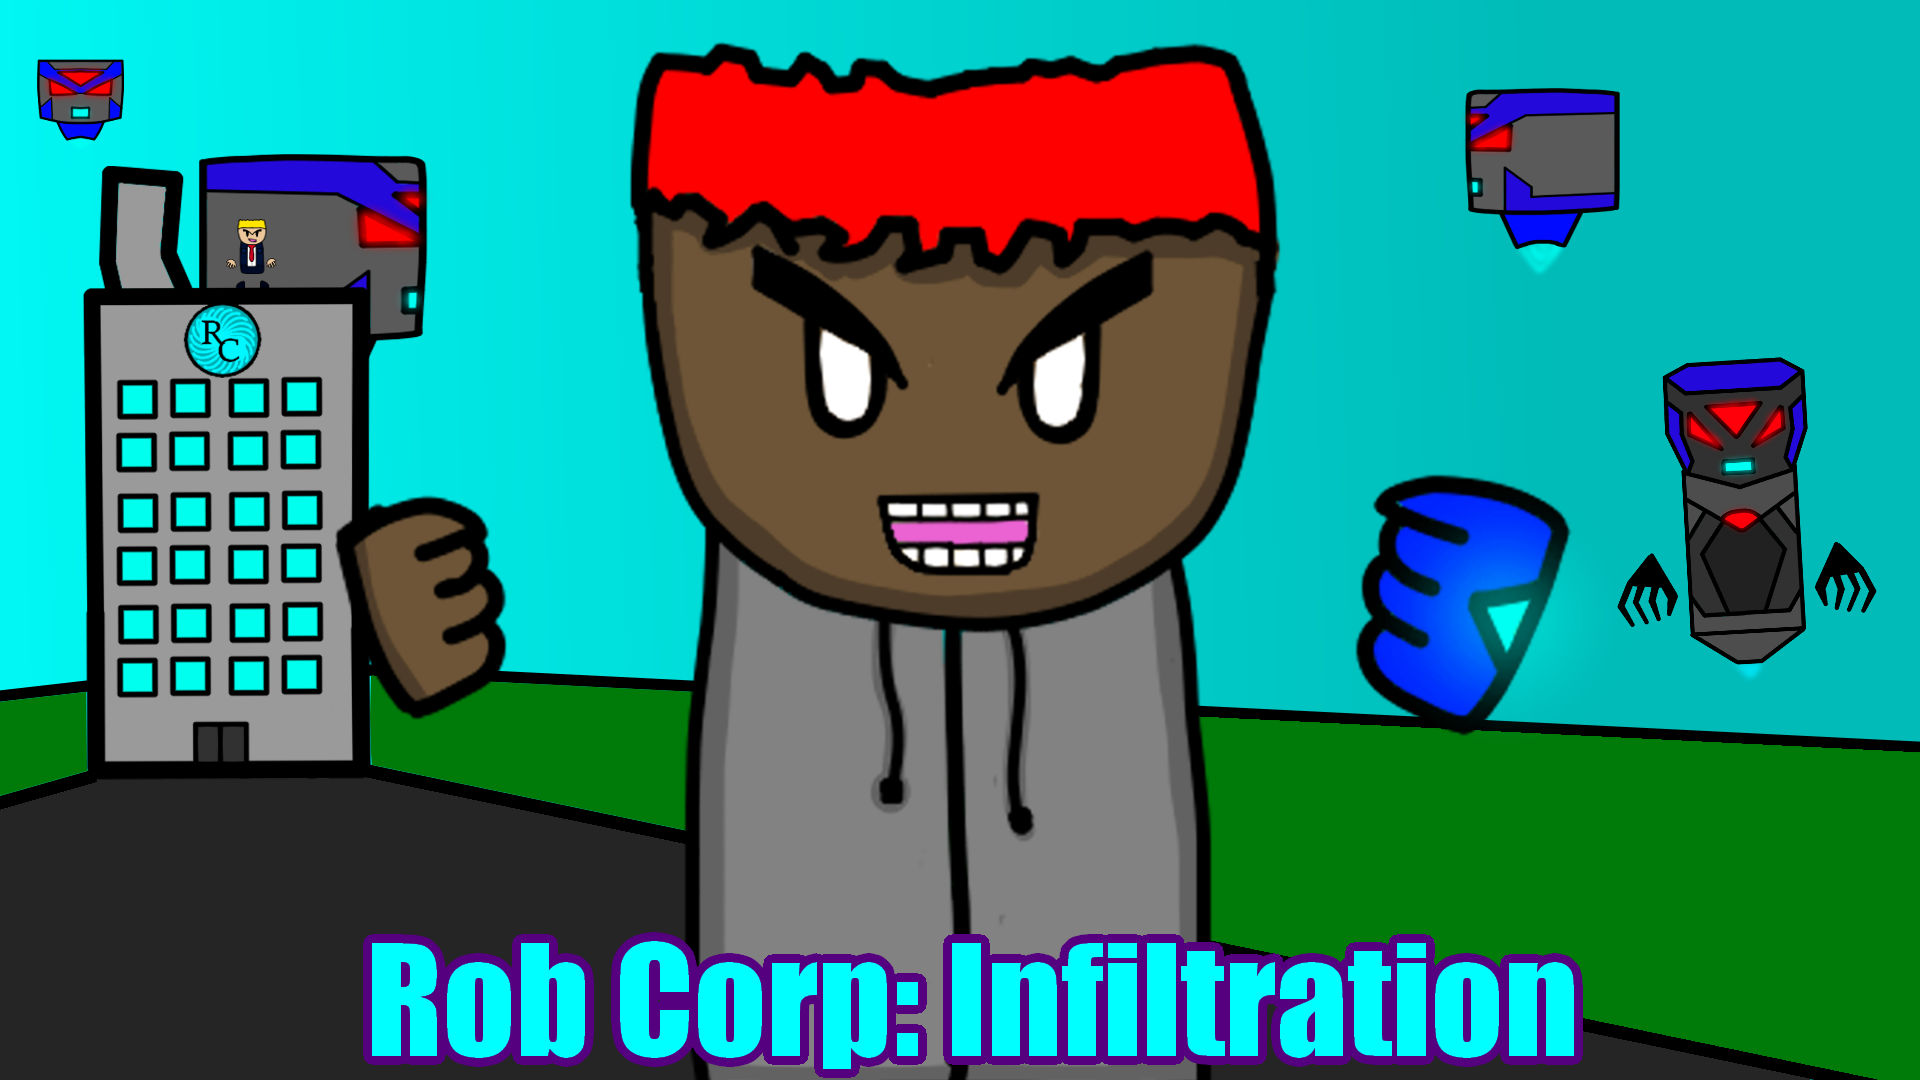 Rob Corp: Infiltration